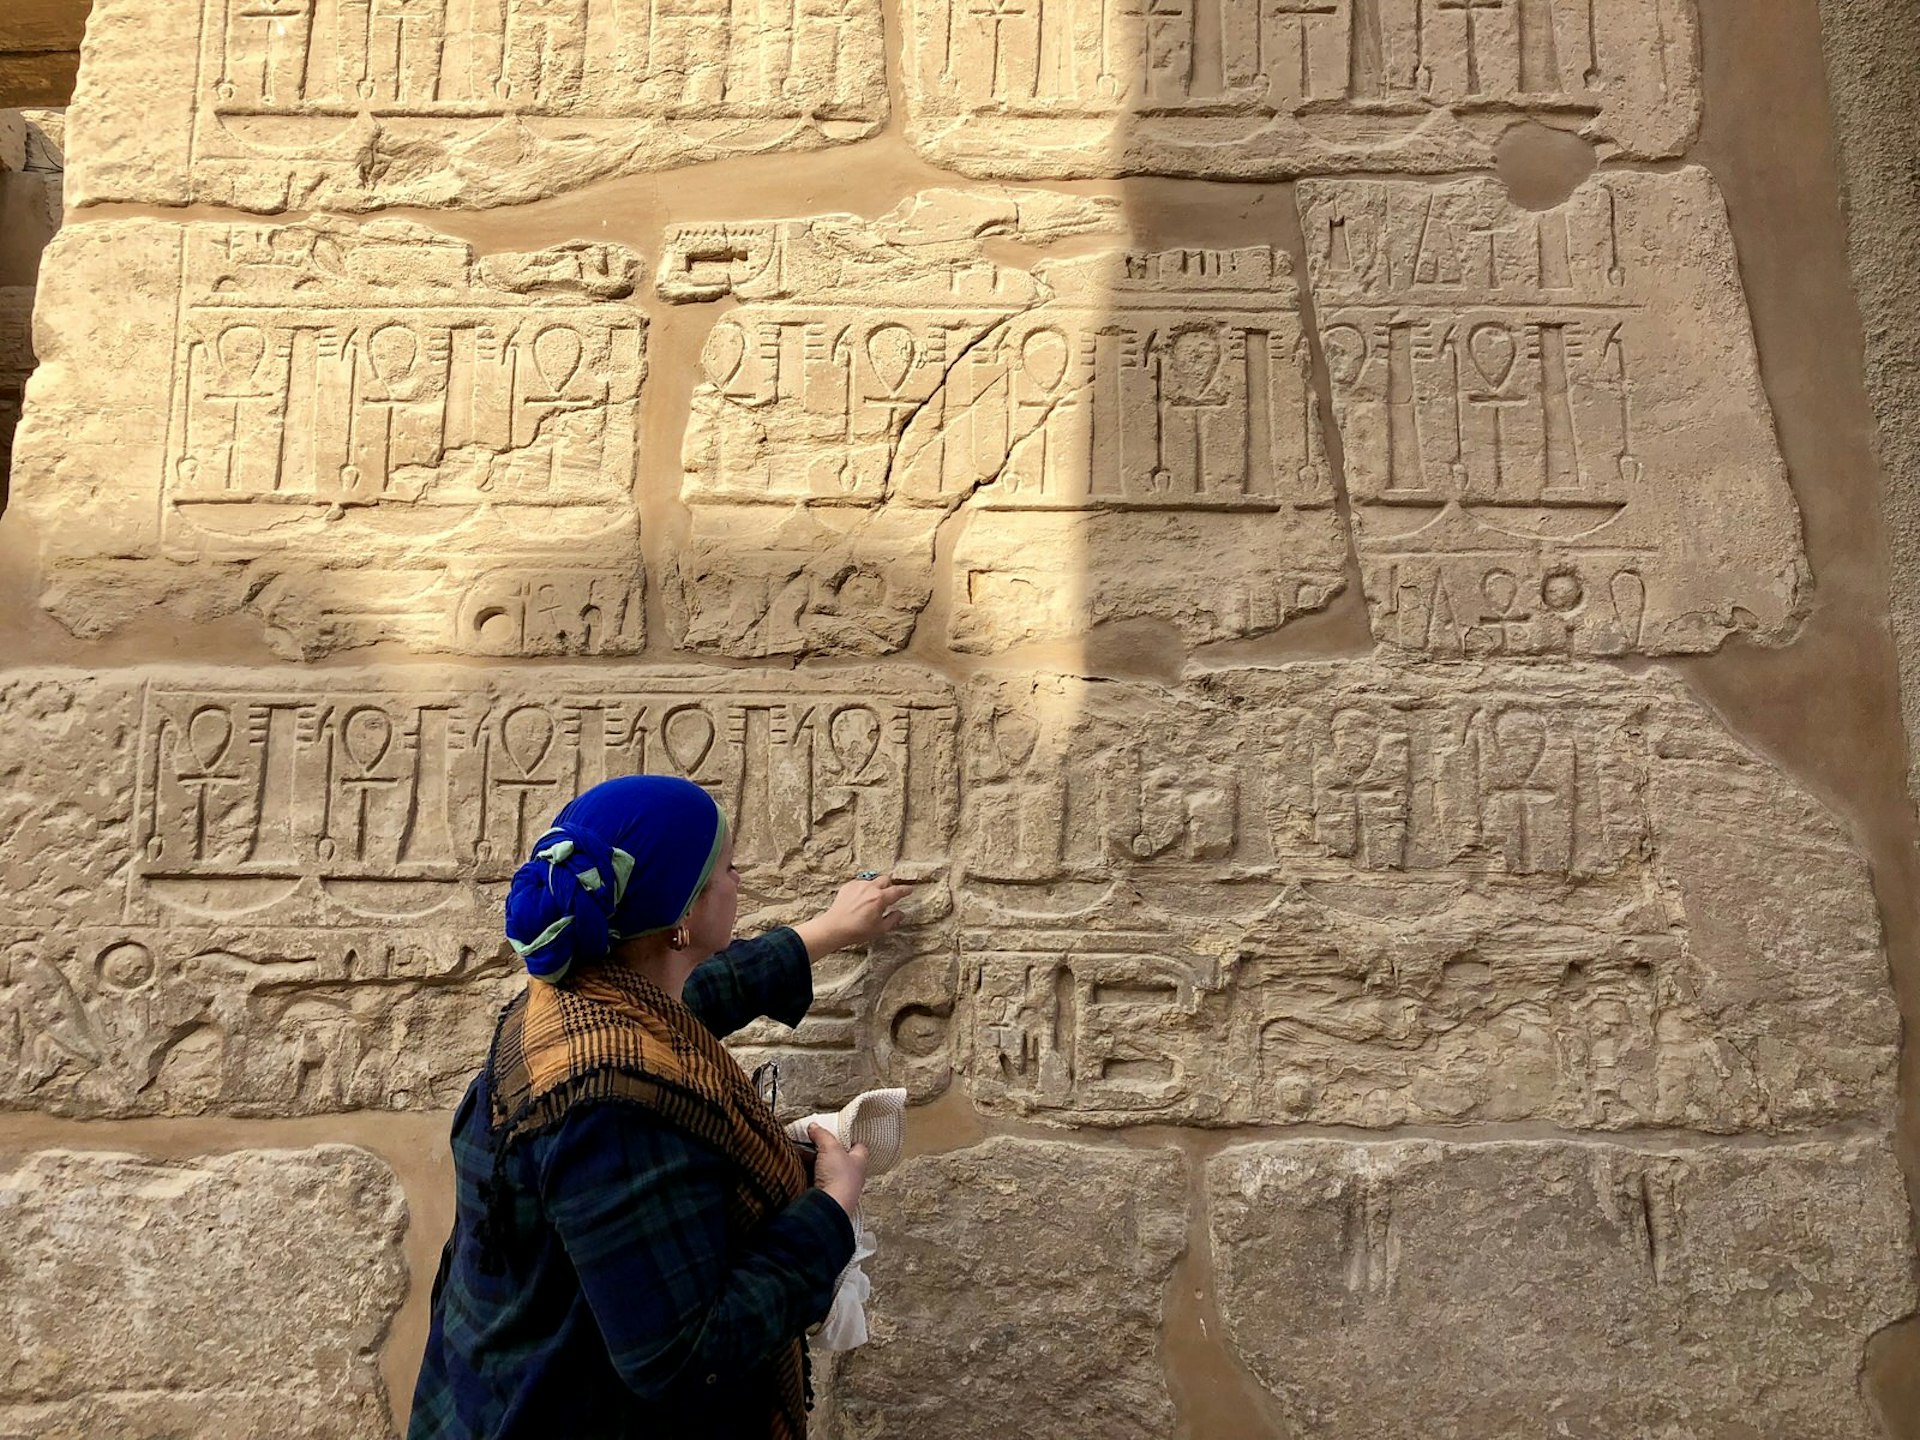 Egyptian guide points out hieroglyphics at Karnak, Luxor, Egypt. Image by Lauren Keith / Lonely Planet